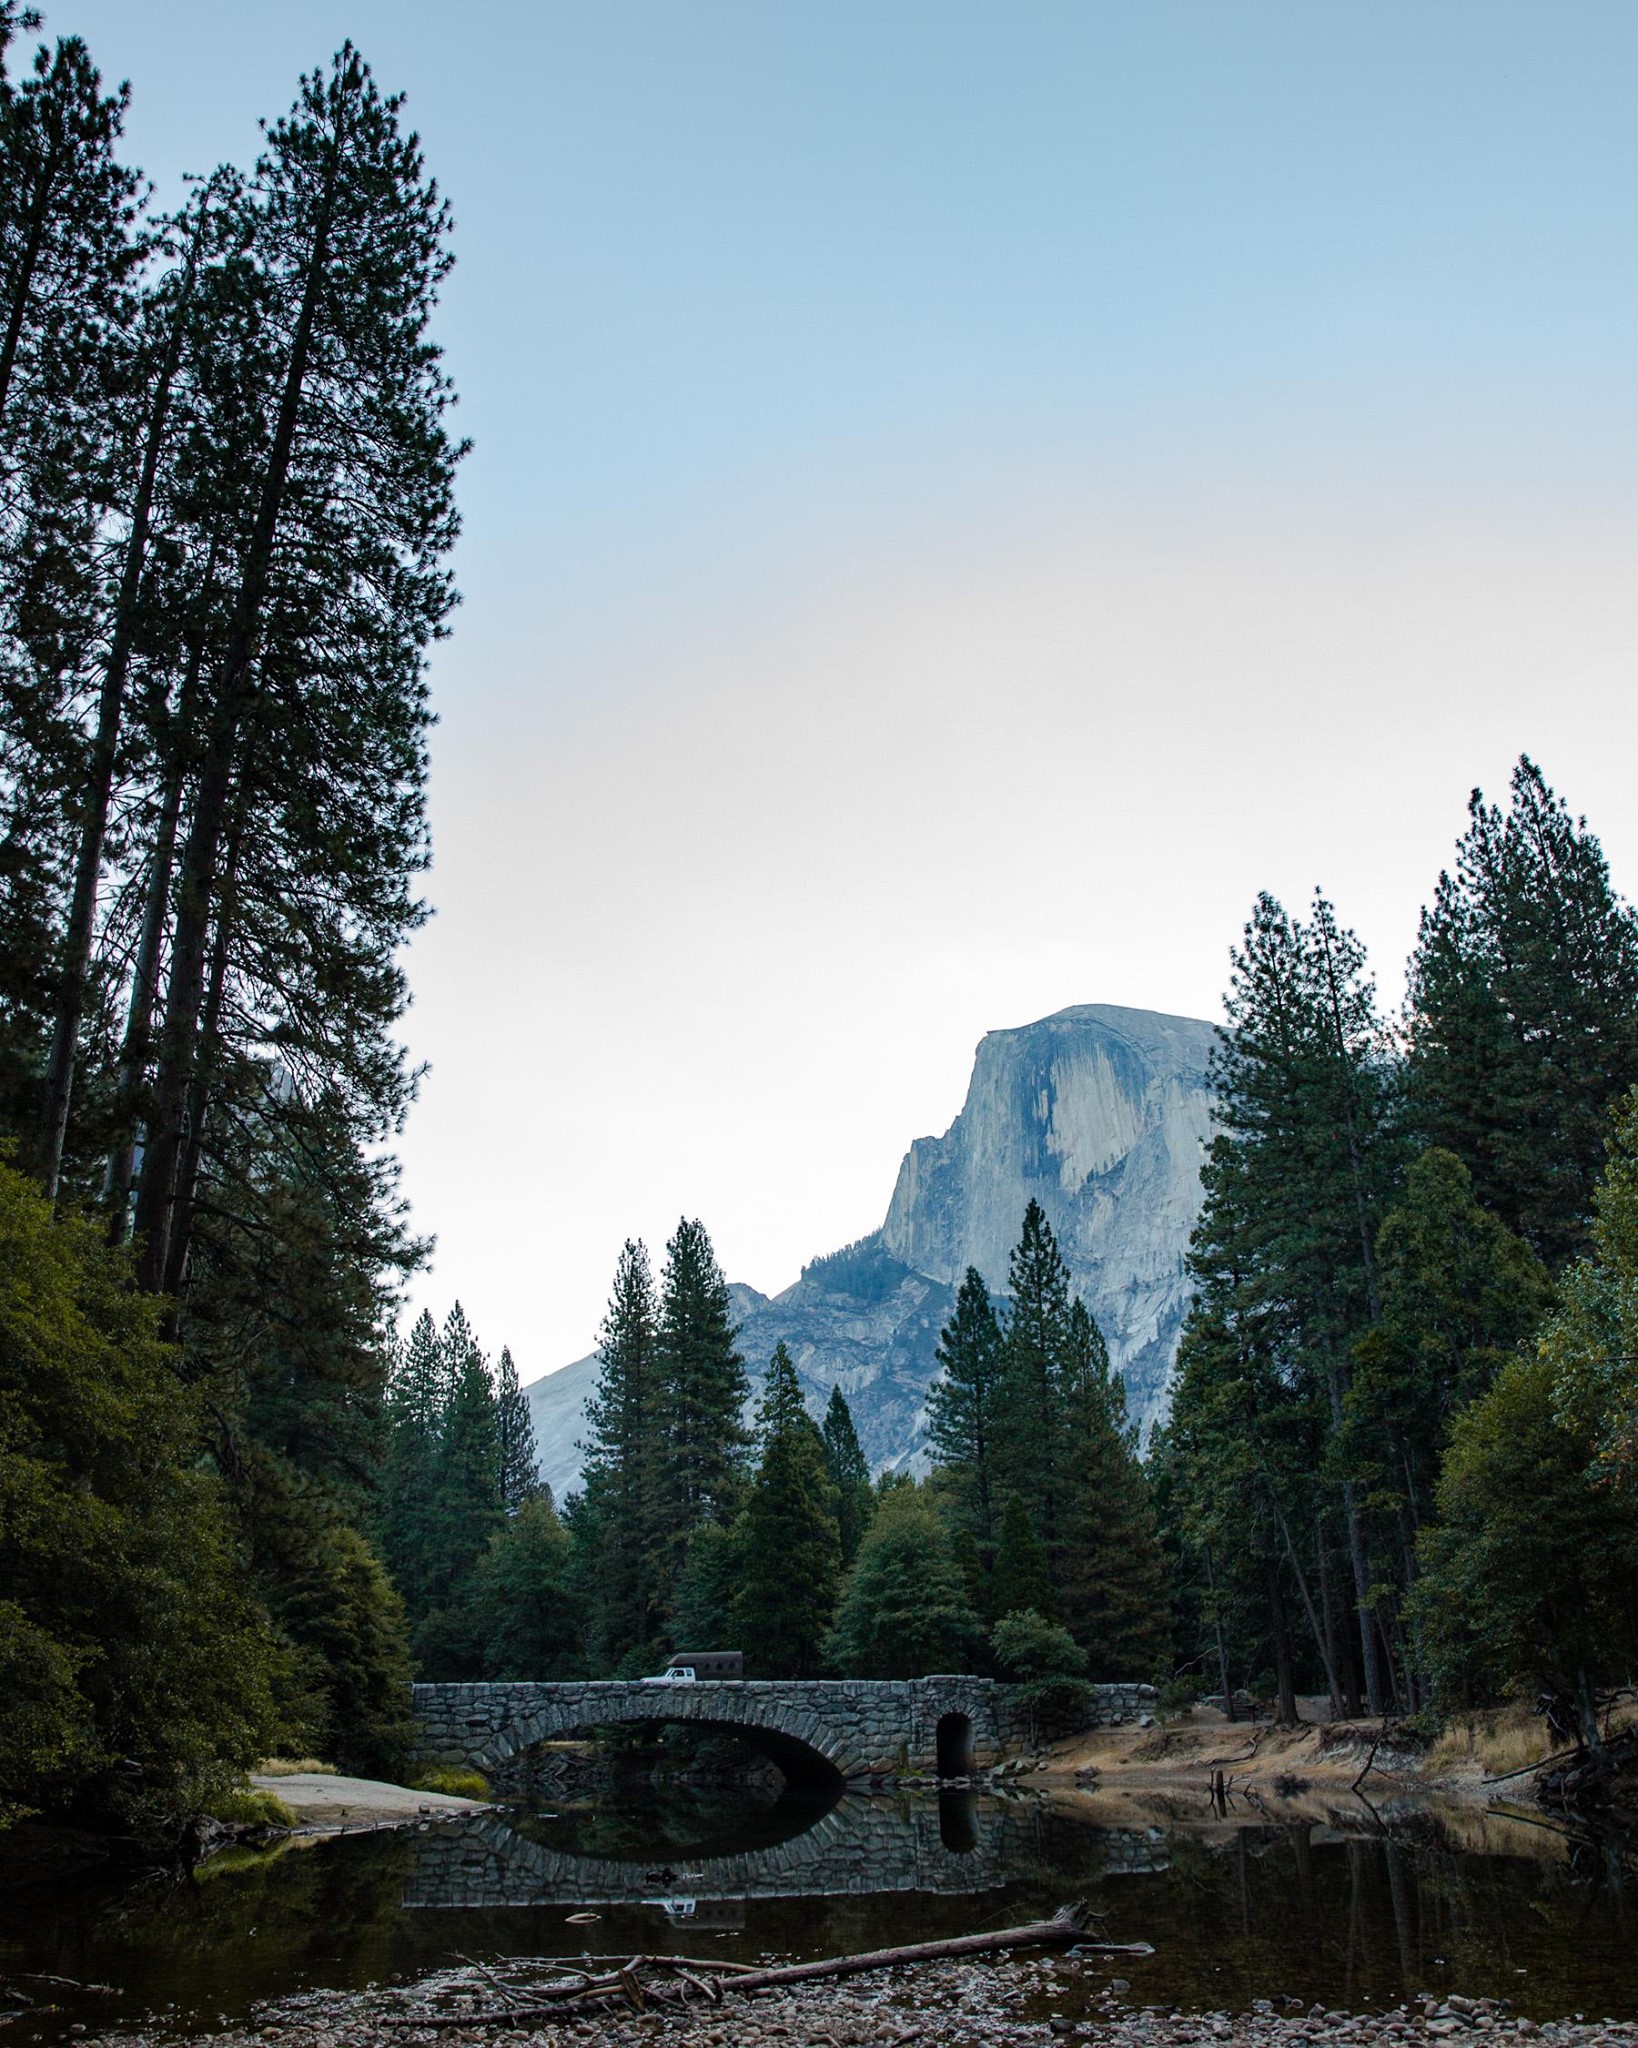 Don’t trash this treasure. Worn Wear is heading to Yosemite National Park  today for the 16th annual Yosemite Facelift , a week of volunteering to clean up the park at the end of summer. If you’re in the Valley, lend a hand and pick up some garbage while Worn Wear gives you a fix.⁠ festivalwalk